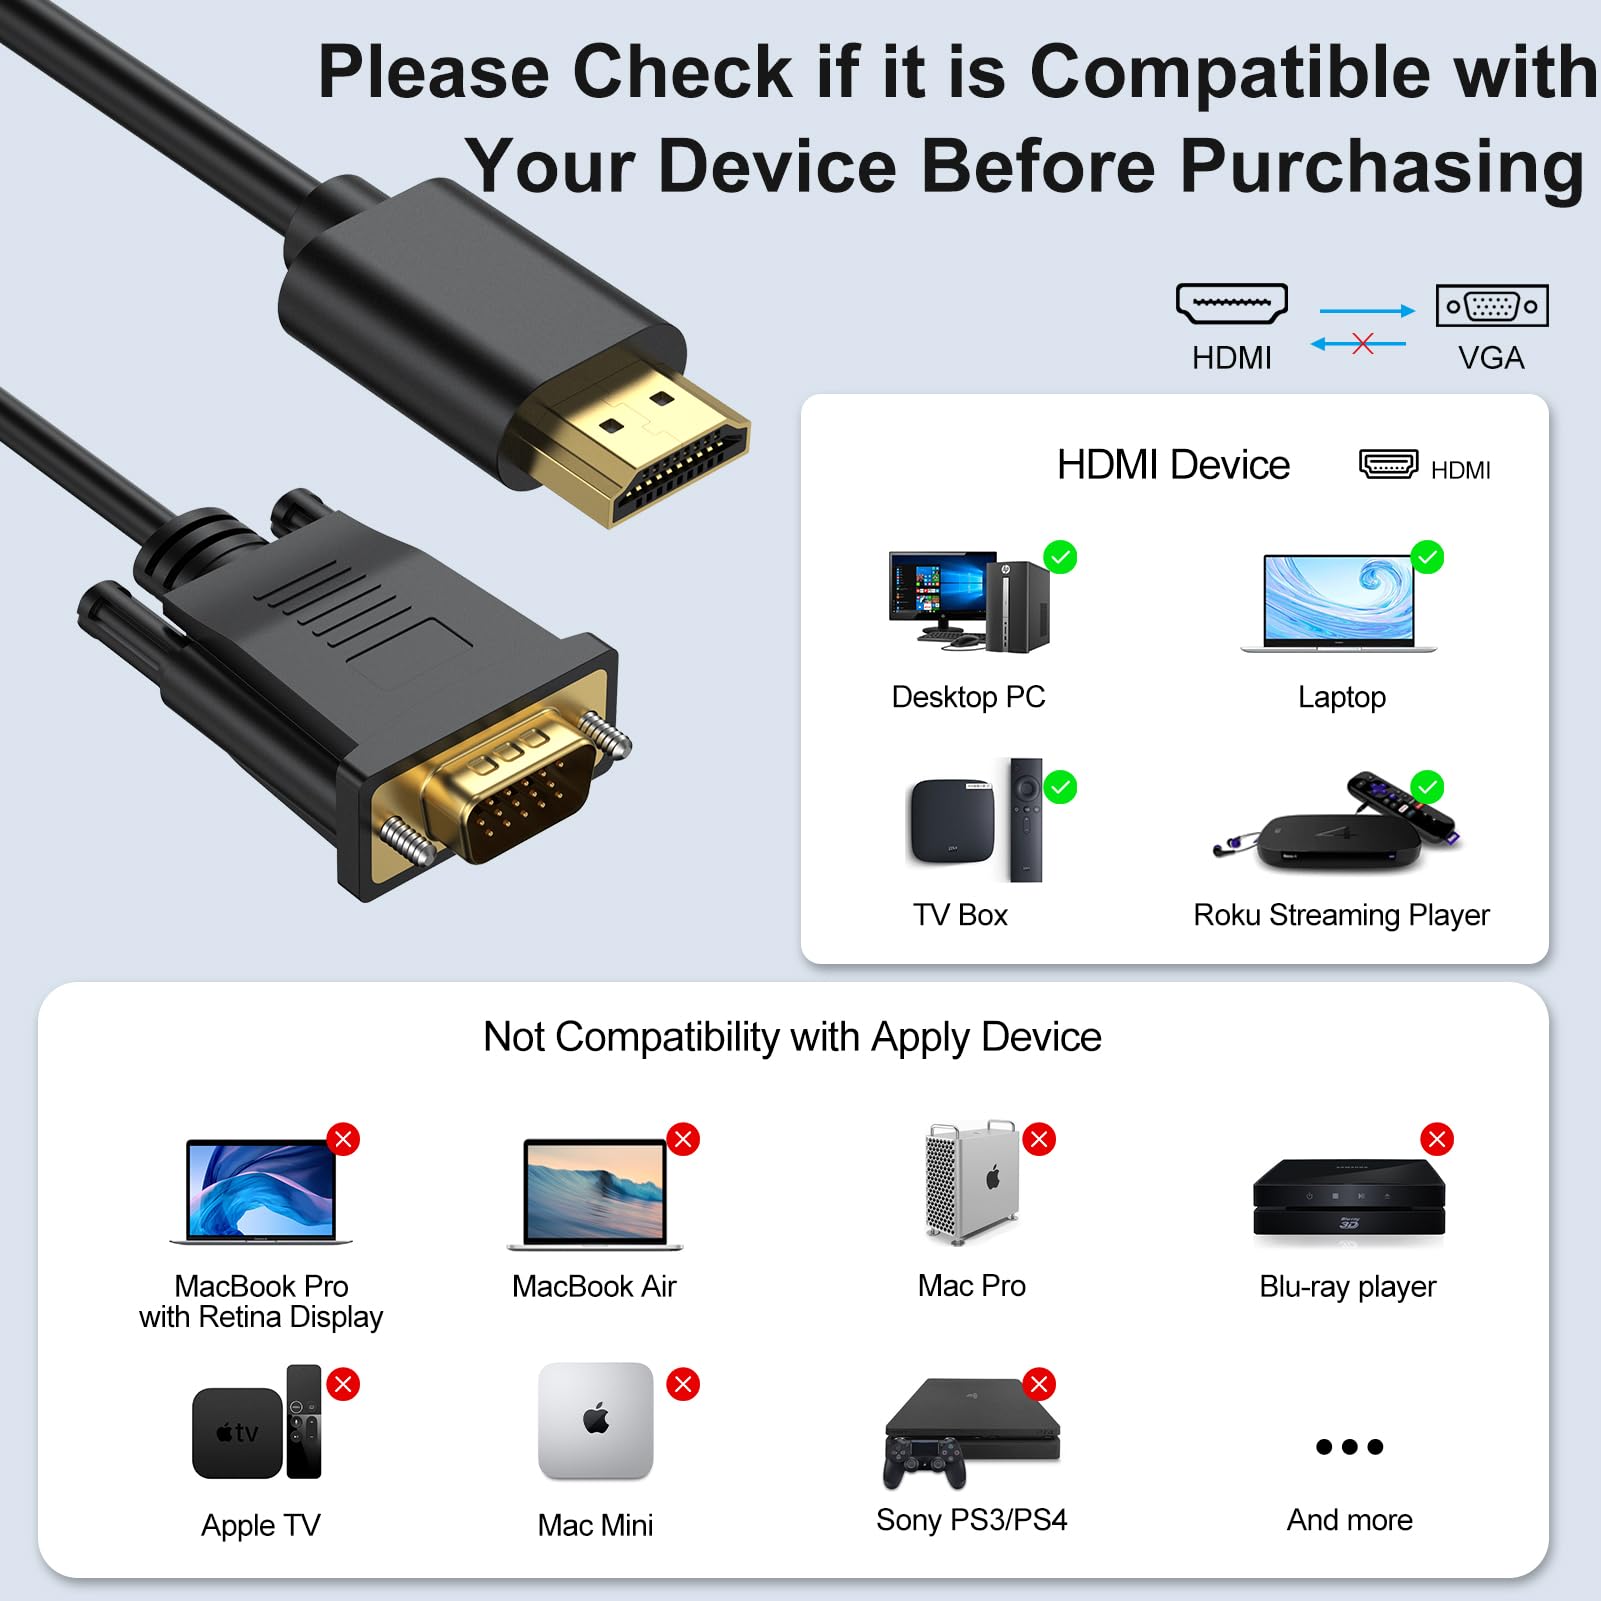 HDMI to VGA Cable 6 Feet, HDMI to VGA Uni-Directional 1080P HD Video Cord Compatible for Computer, Desktop, Laptop, PC, Monitor, Projector, HDTV and More (1.8M)